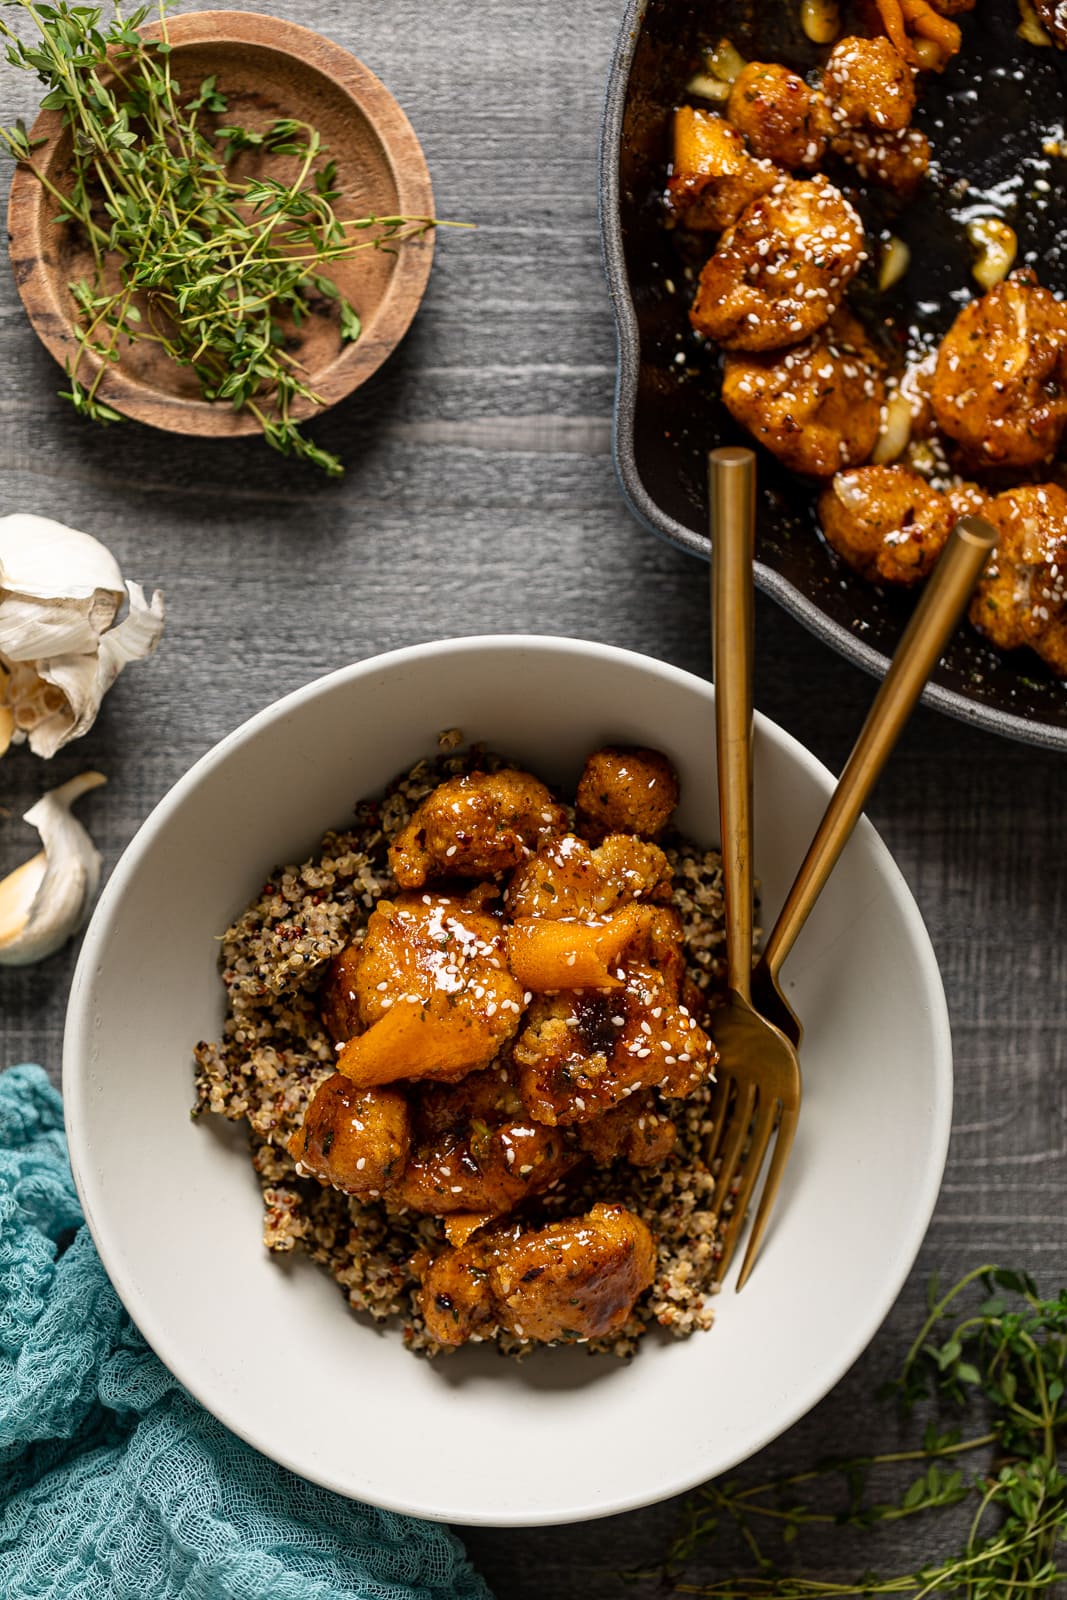 Bowl and skillet of Baked Sticky Orange Cauliflower with Quinoa